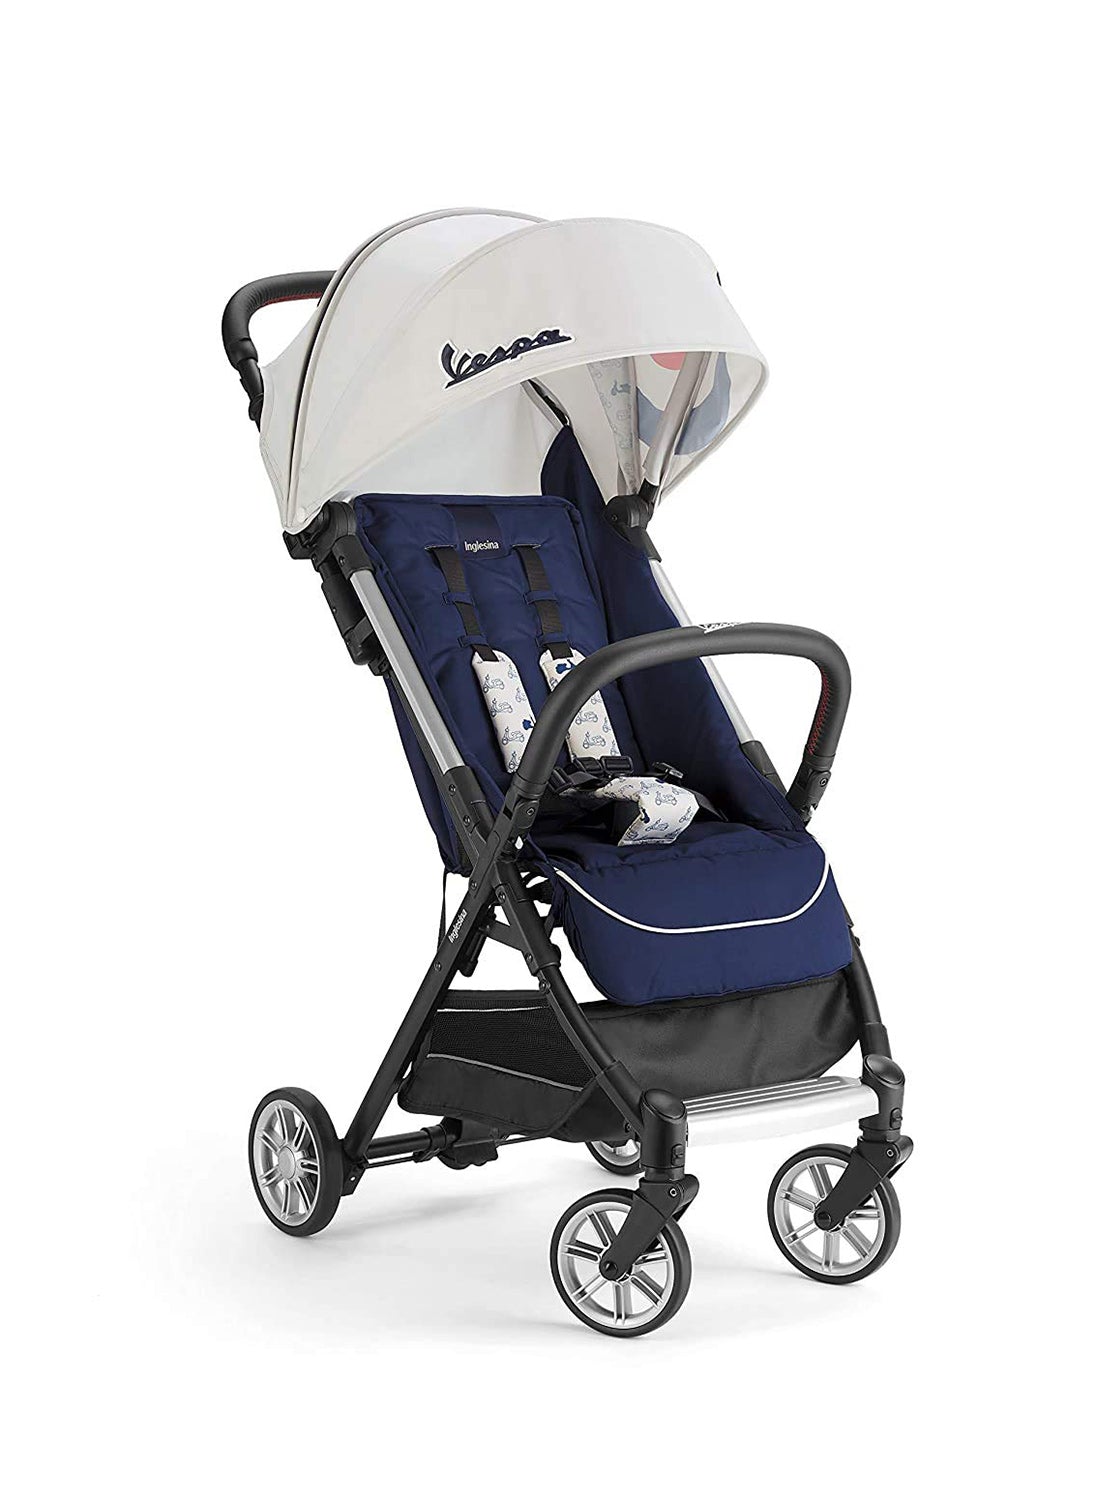 Inglesina Quid2 Stroller review - Lightweight buggies & strollers -  Pushchairs